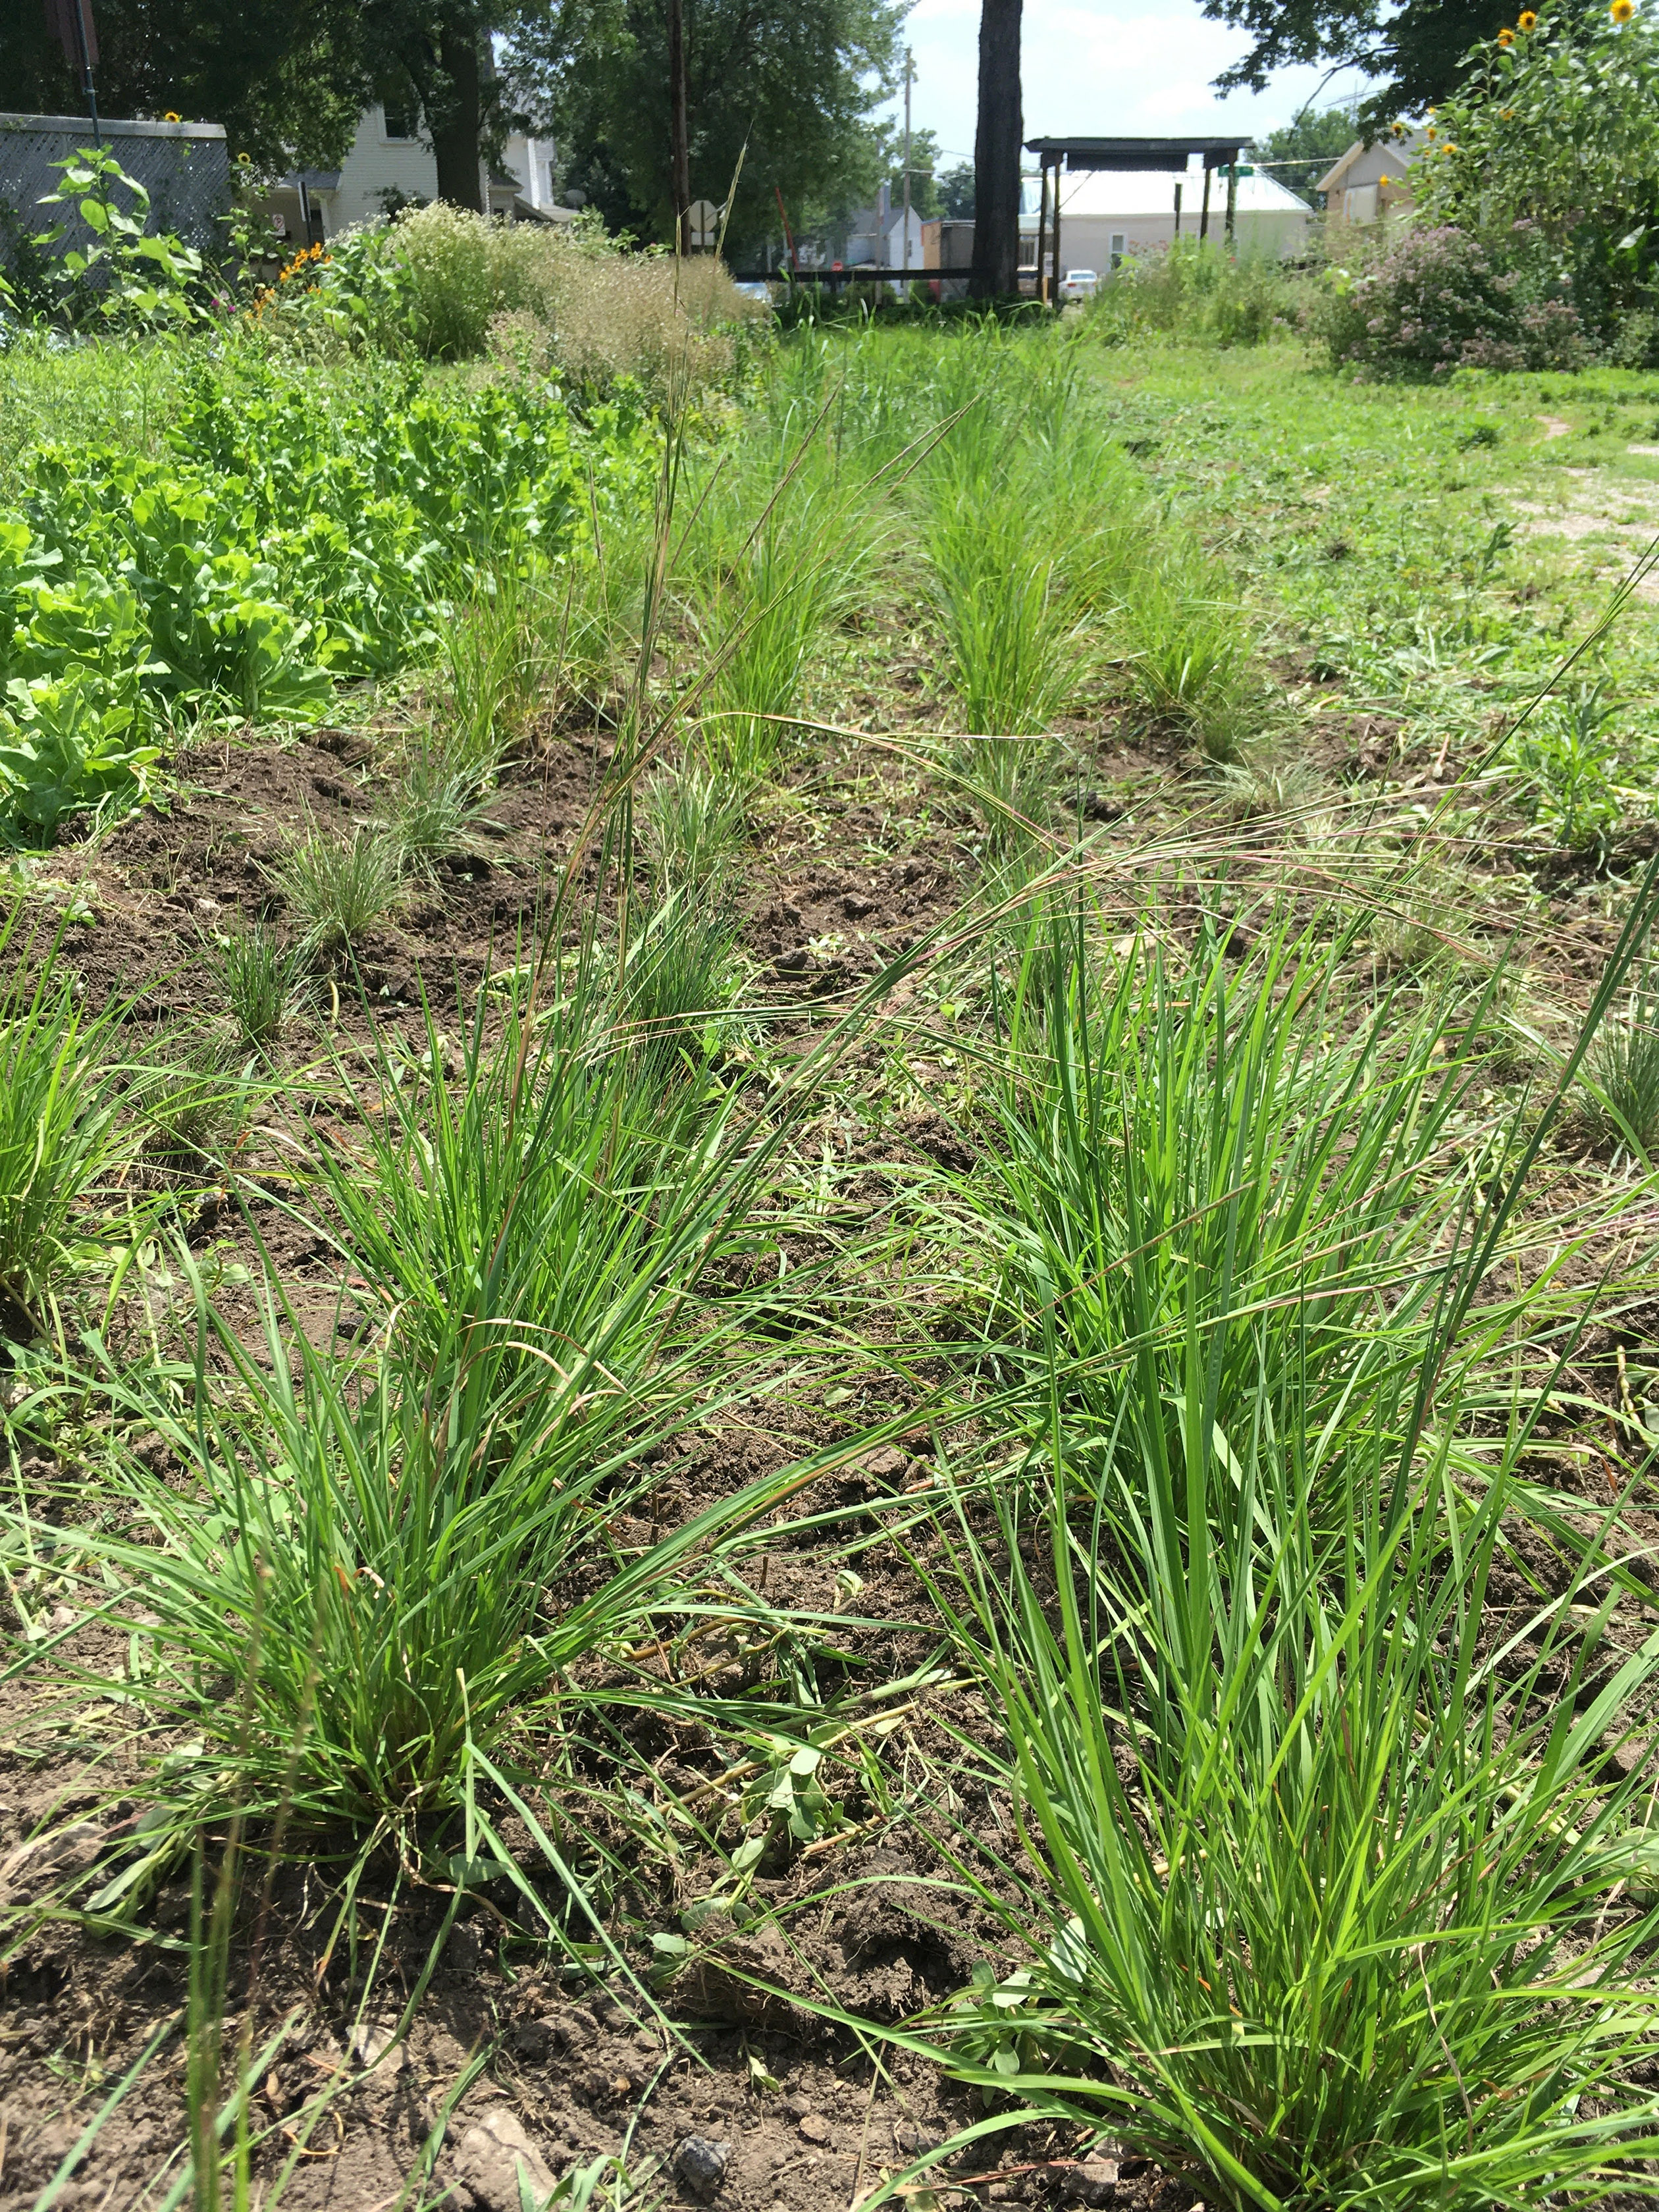 Several parallel rows of newly planted bunchgrasses recede into the distance, marking the line of a beetle bank.